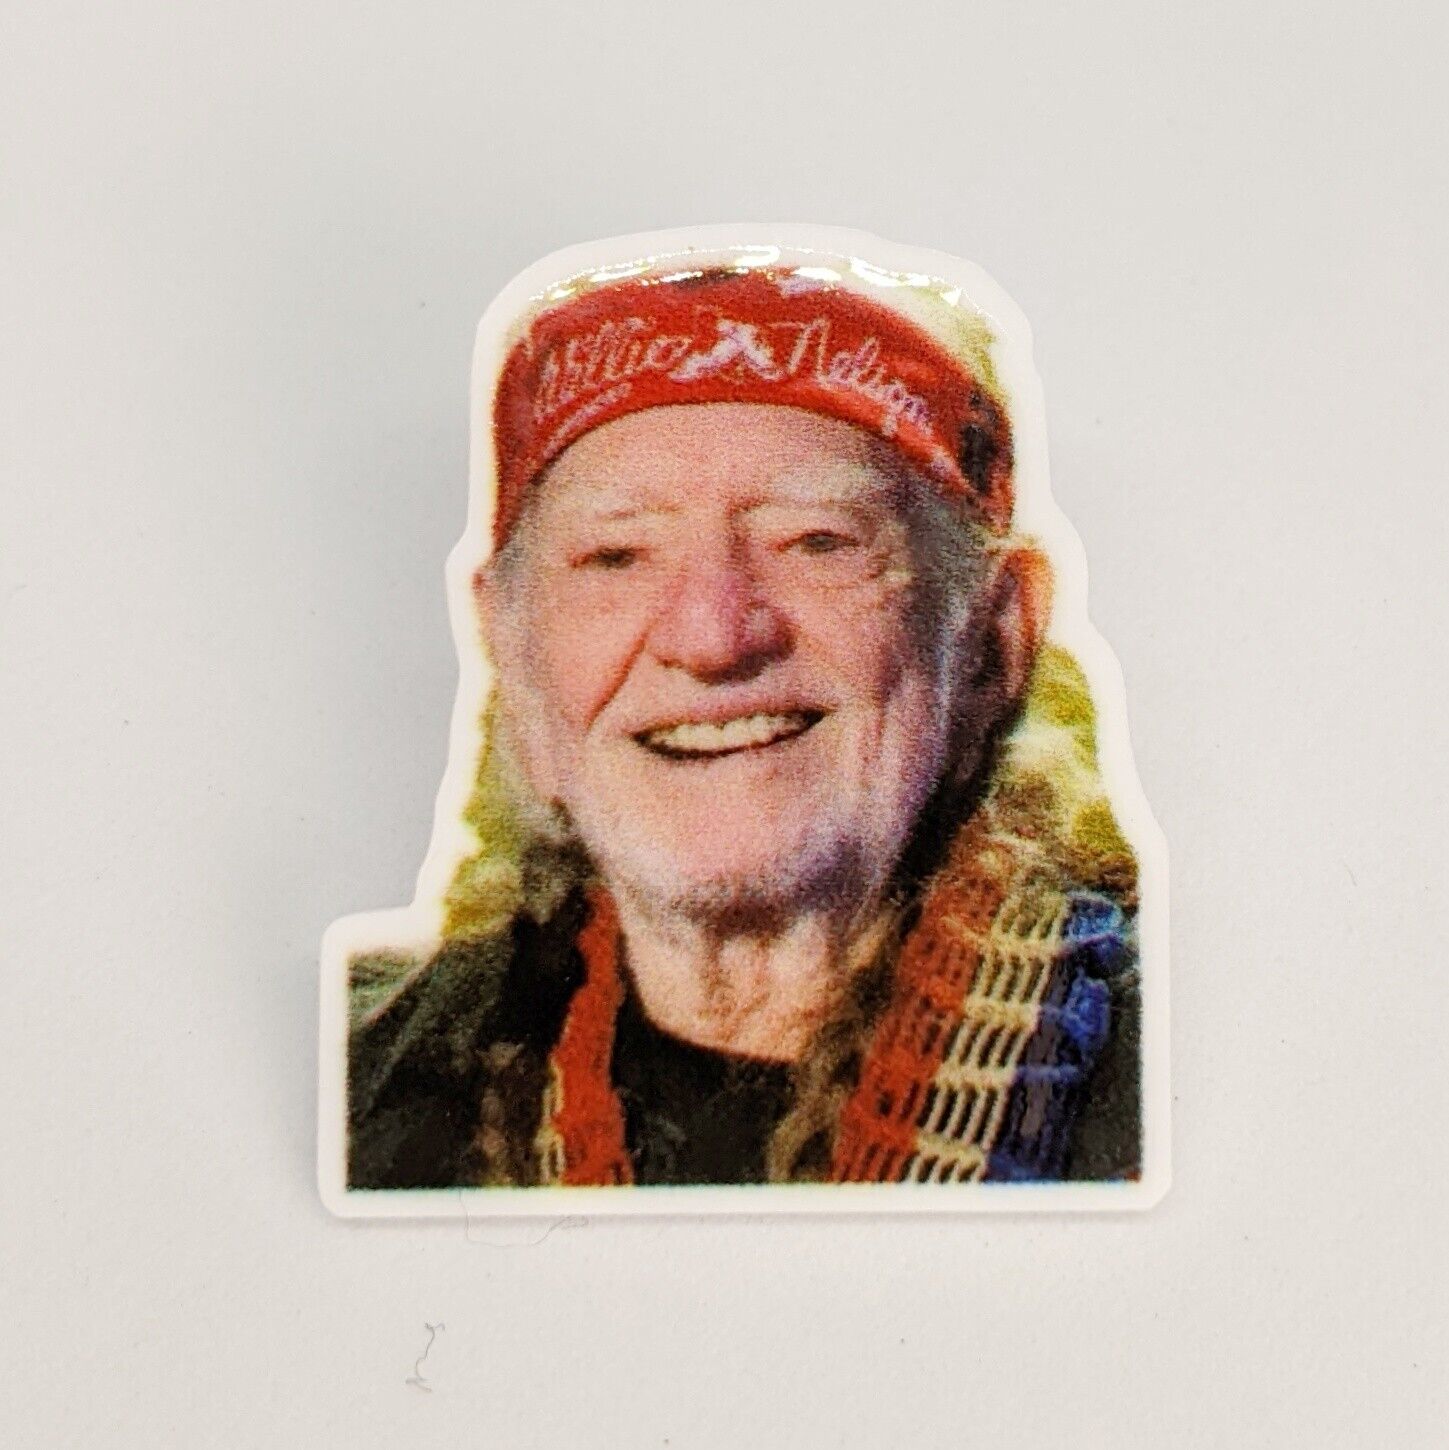 Willie Nelson Acrylic Pin Brooch Badge Country Singer Music Pinback New